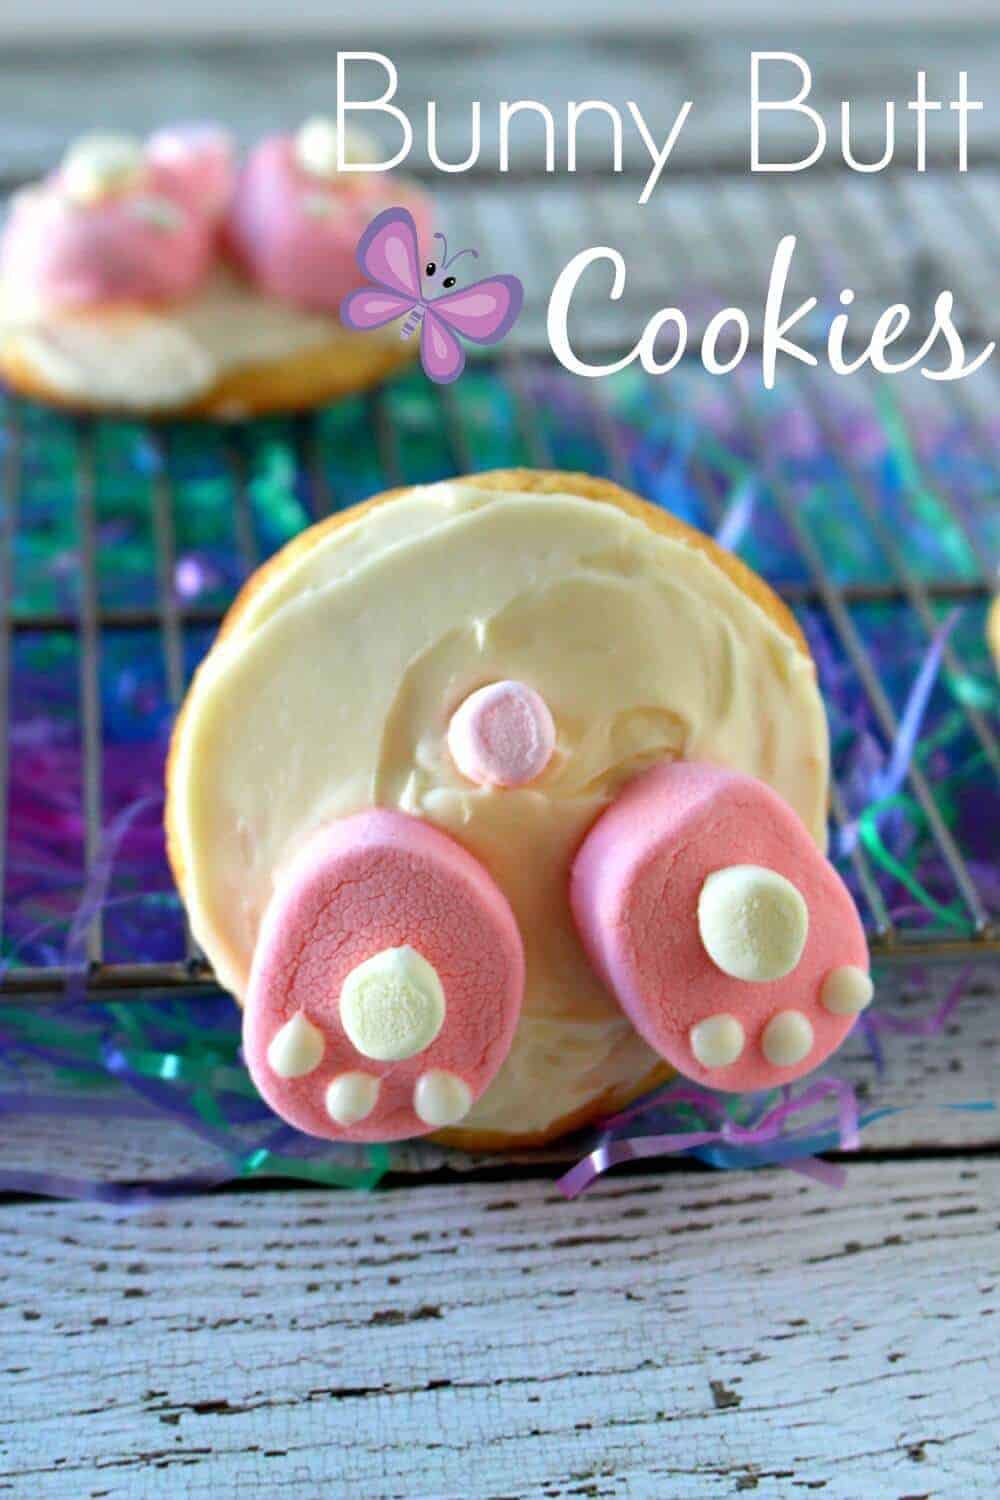 Bunny butt cookies - a great Easter treat